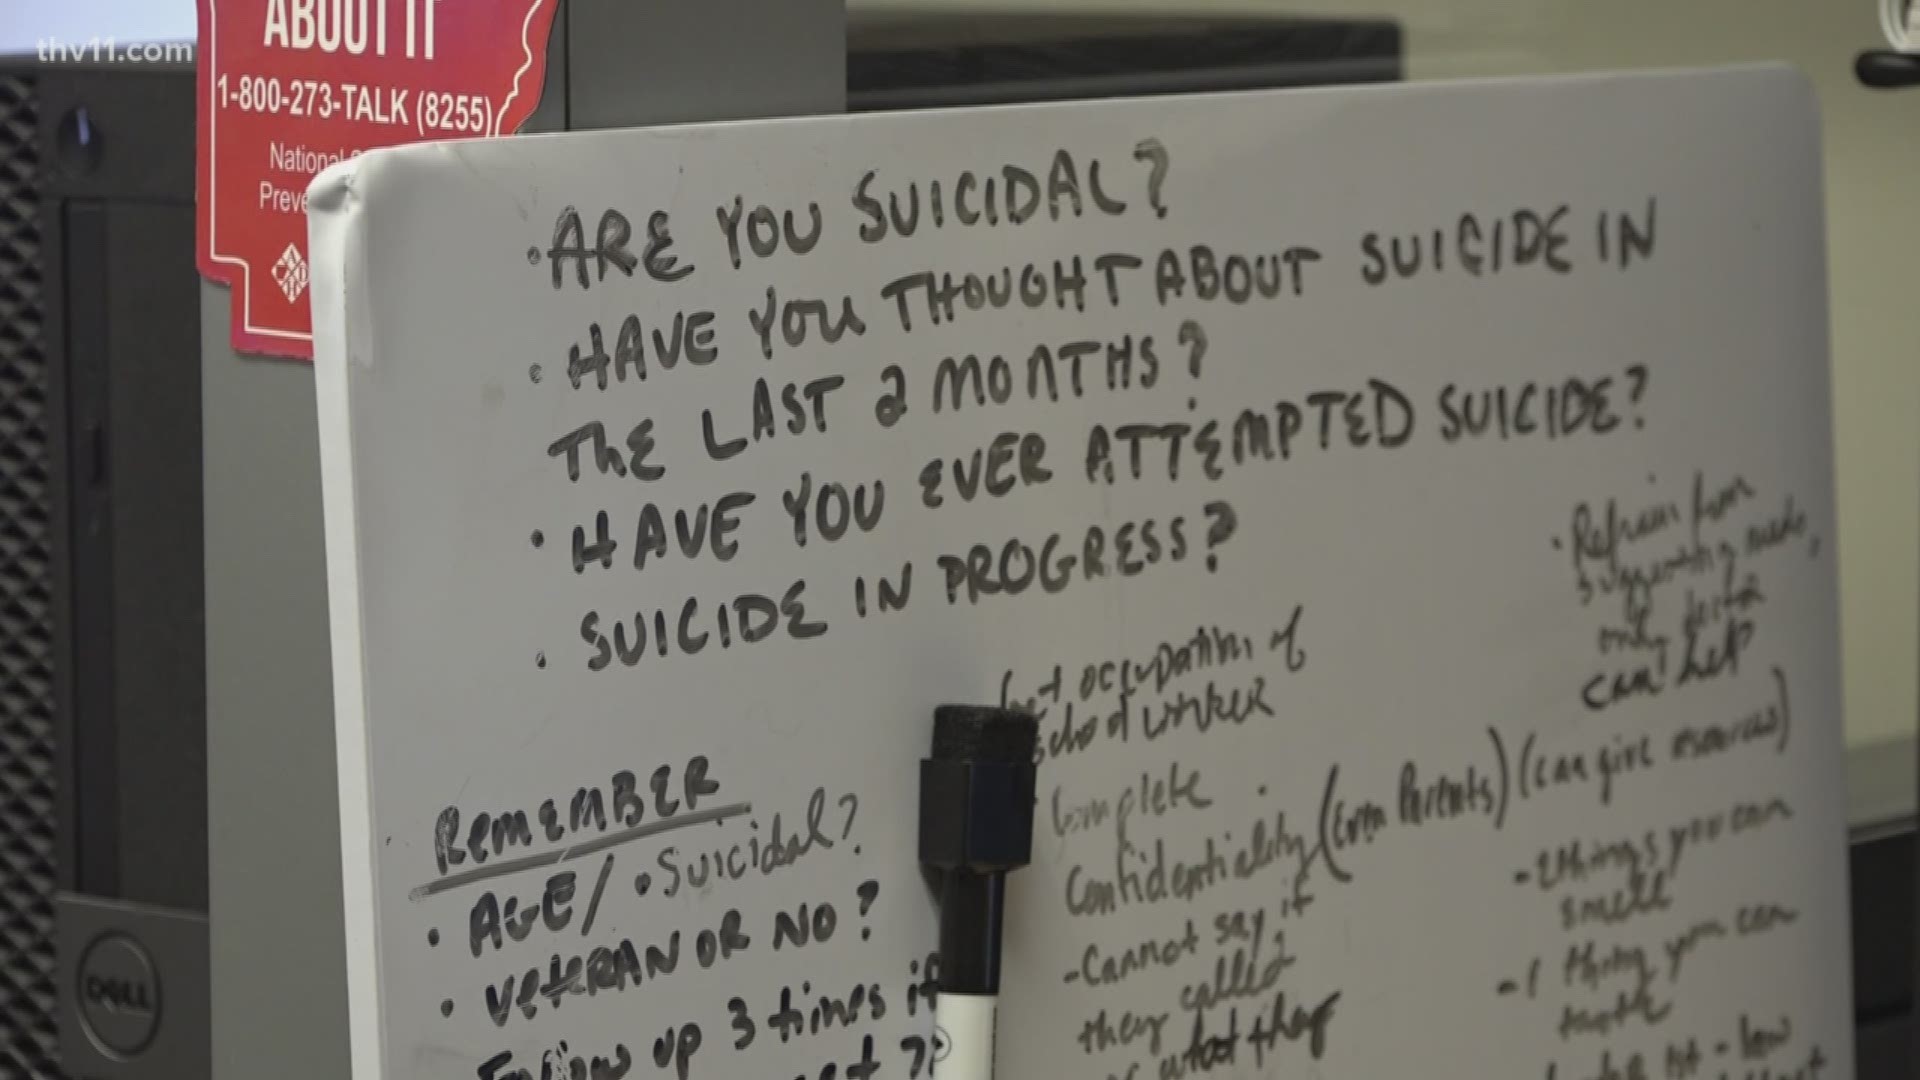 Spike in calls to suicide prevention lifeline